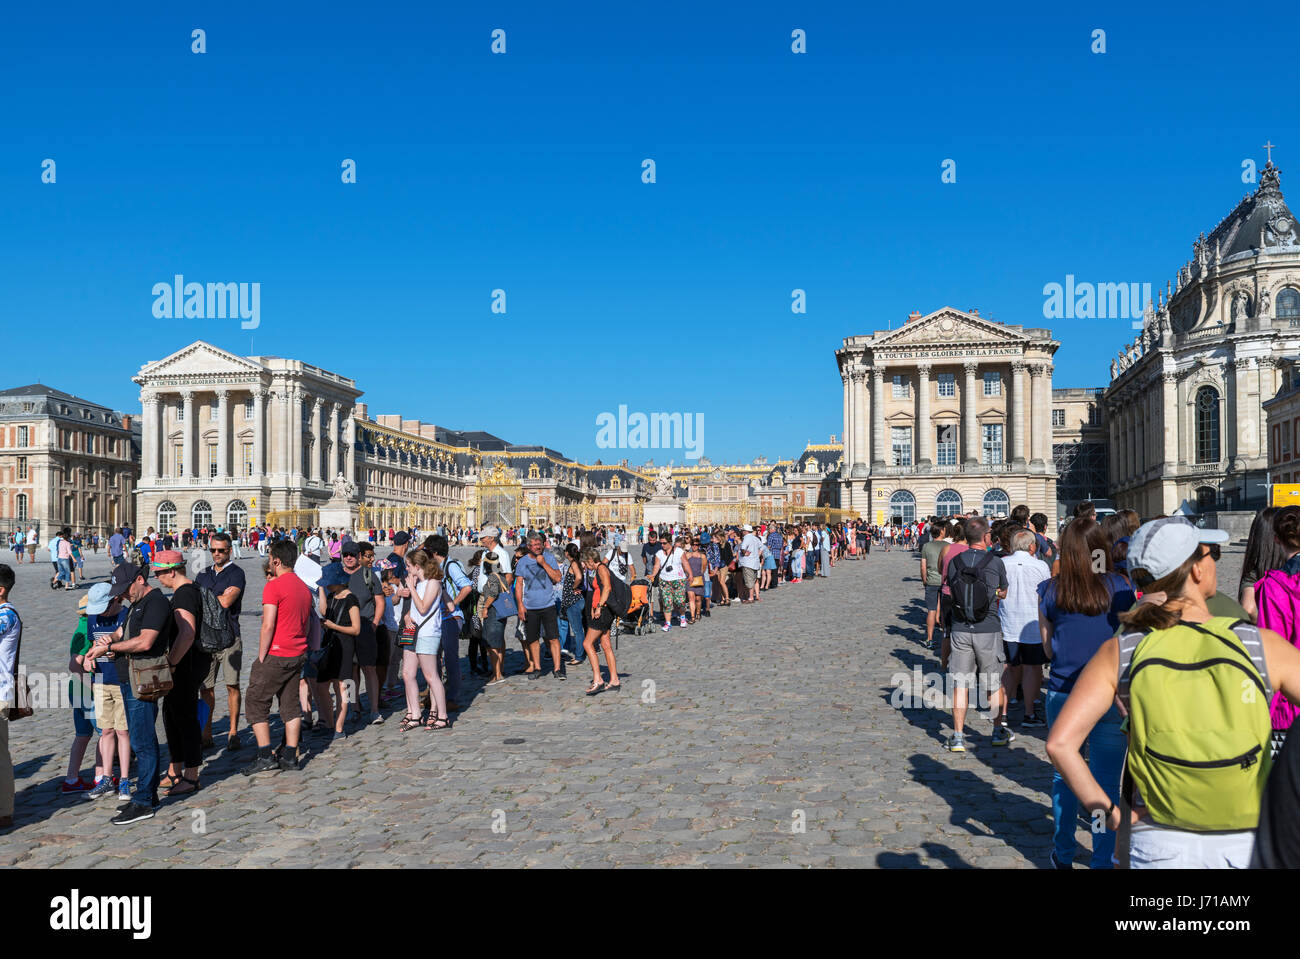 Long lines of people waiting to get through security checks at the Chateau de Versailles (Palace of Versailles), near Paris, France Stock Photo